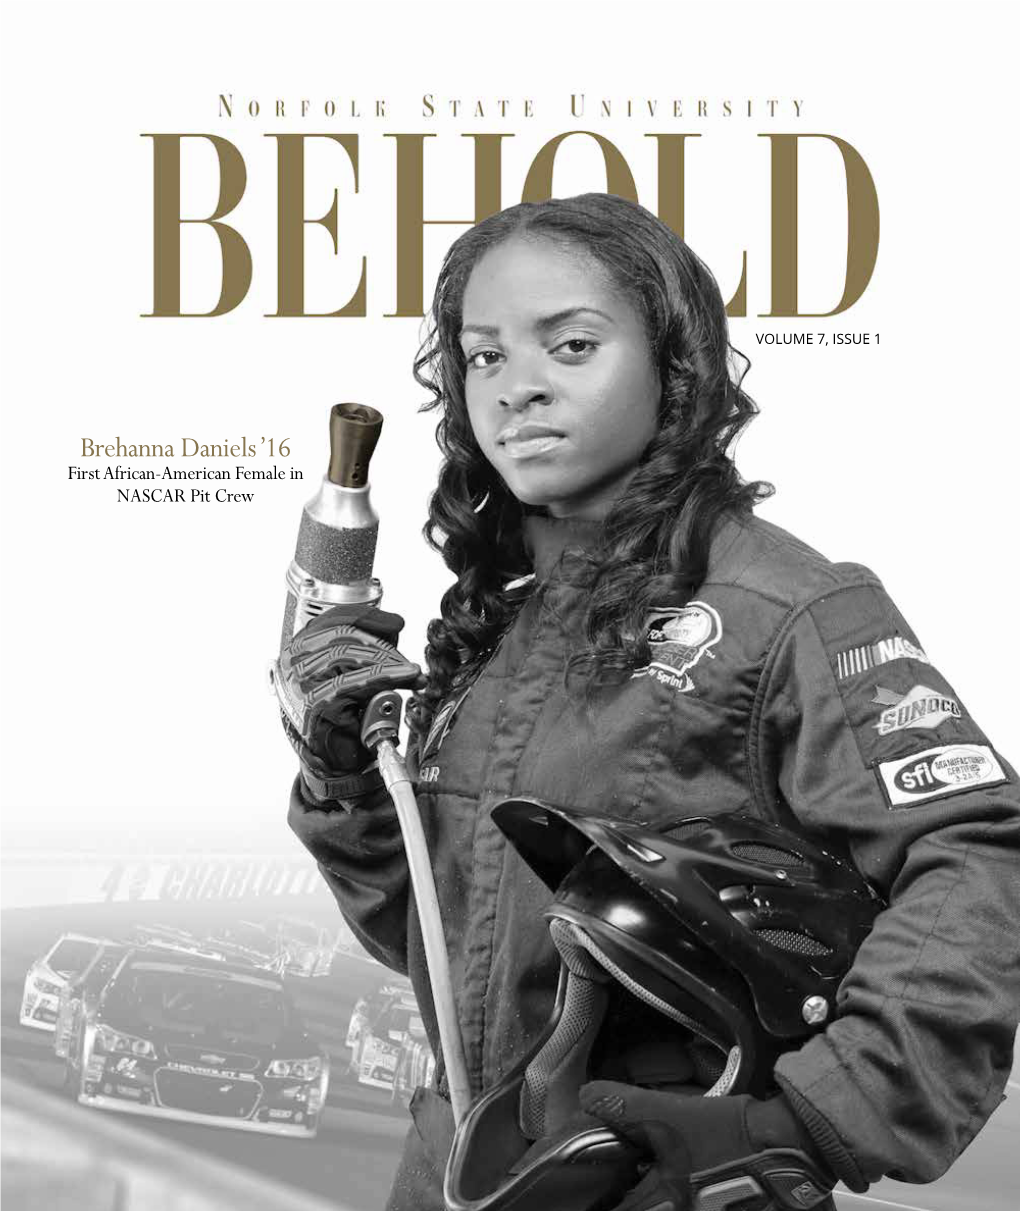 Brehanna Daniels ’16 First African-American Female in NASCAR Pit Crew Contents PHOTO by JAMES SOSSOU from the Desk of the 2 Vice President for University Advancement